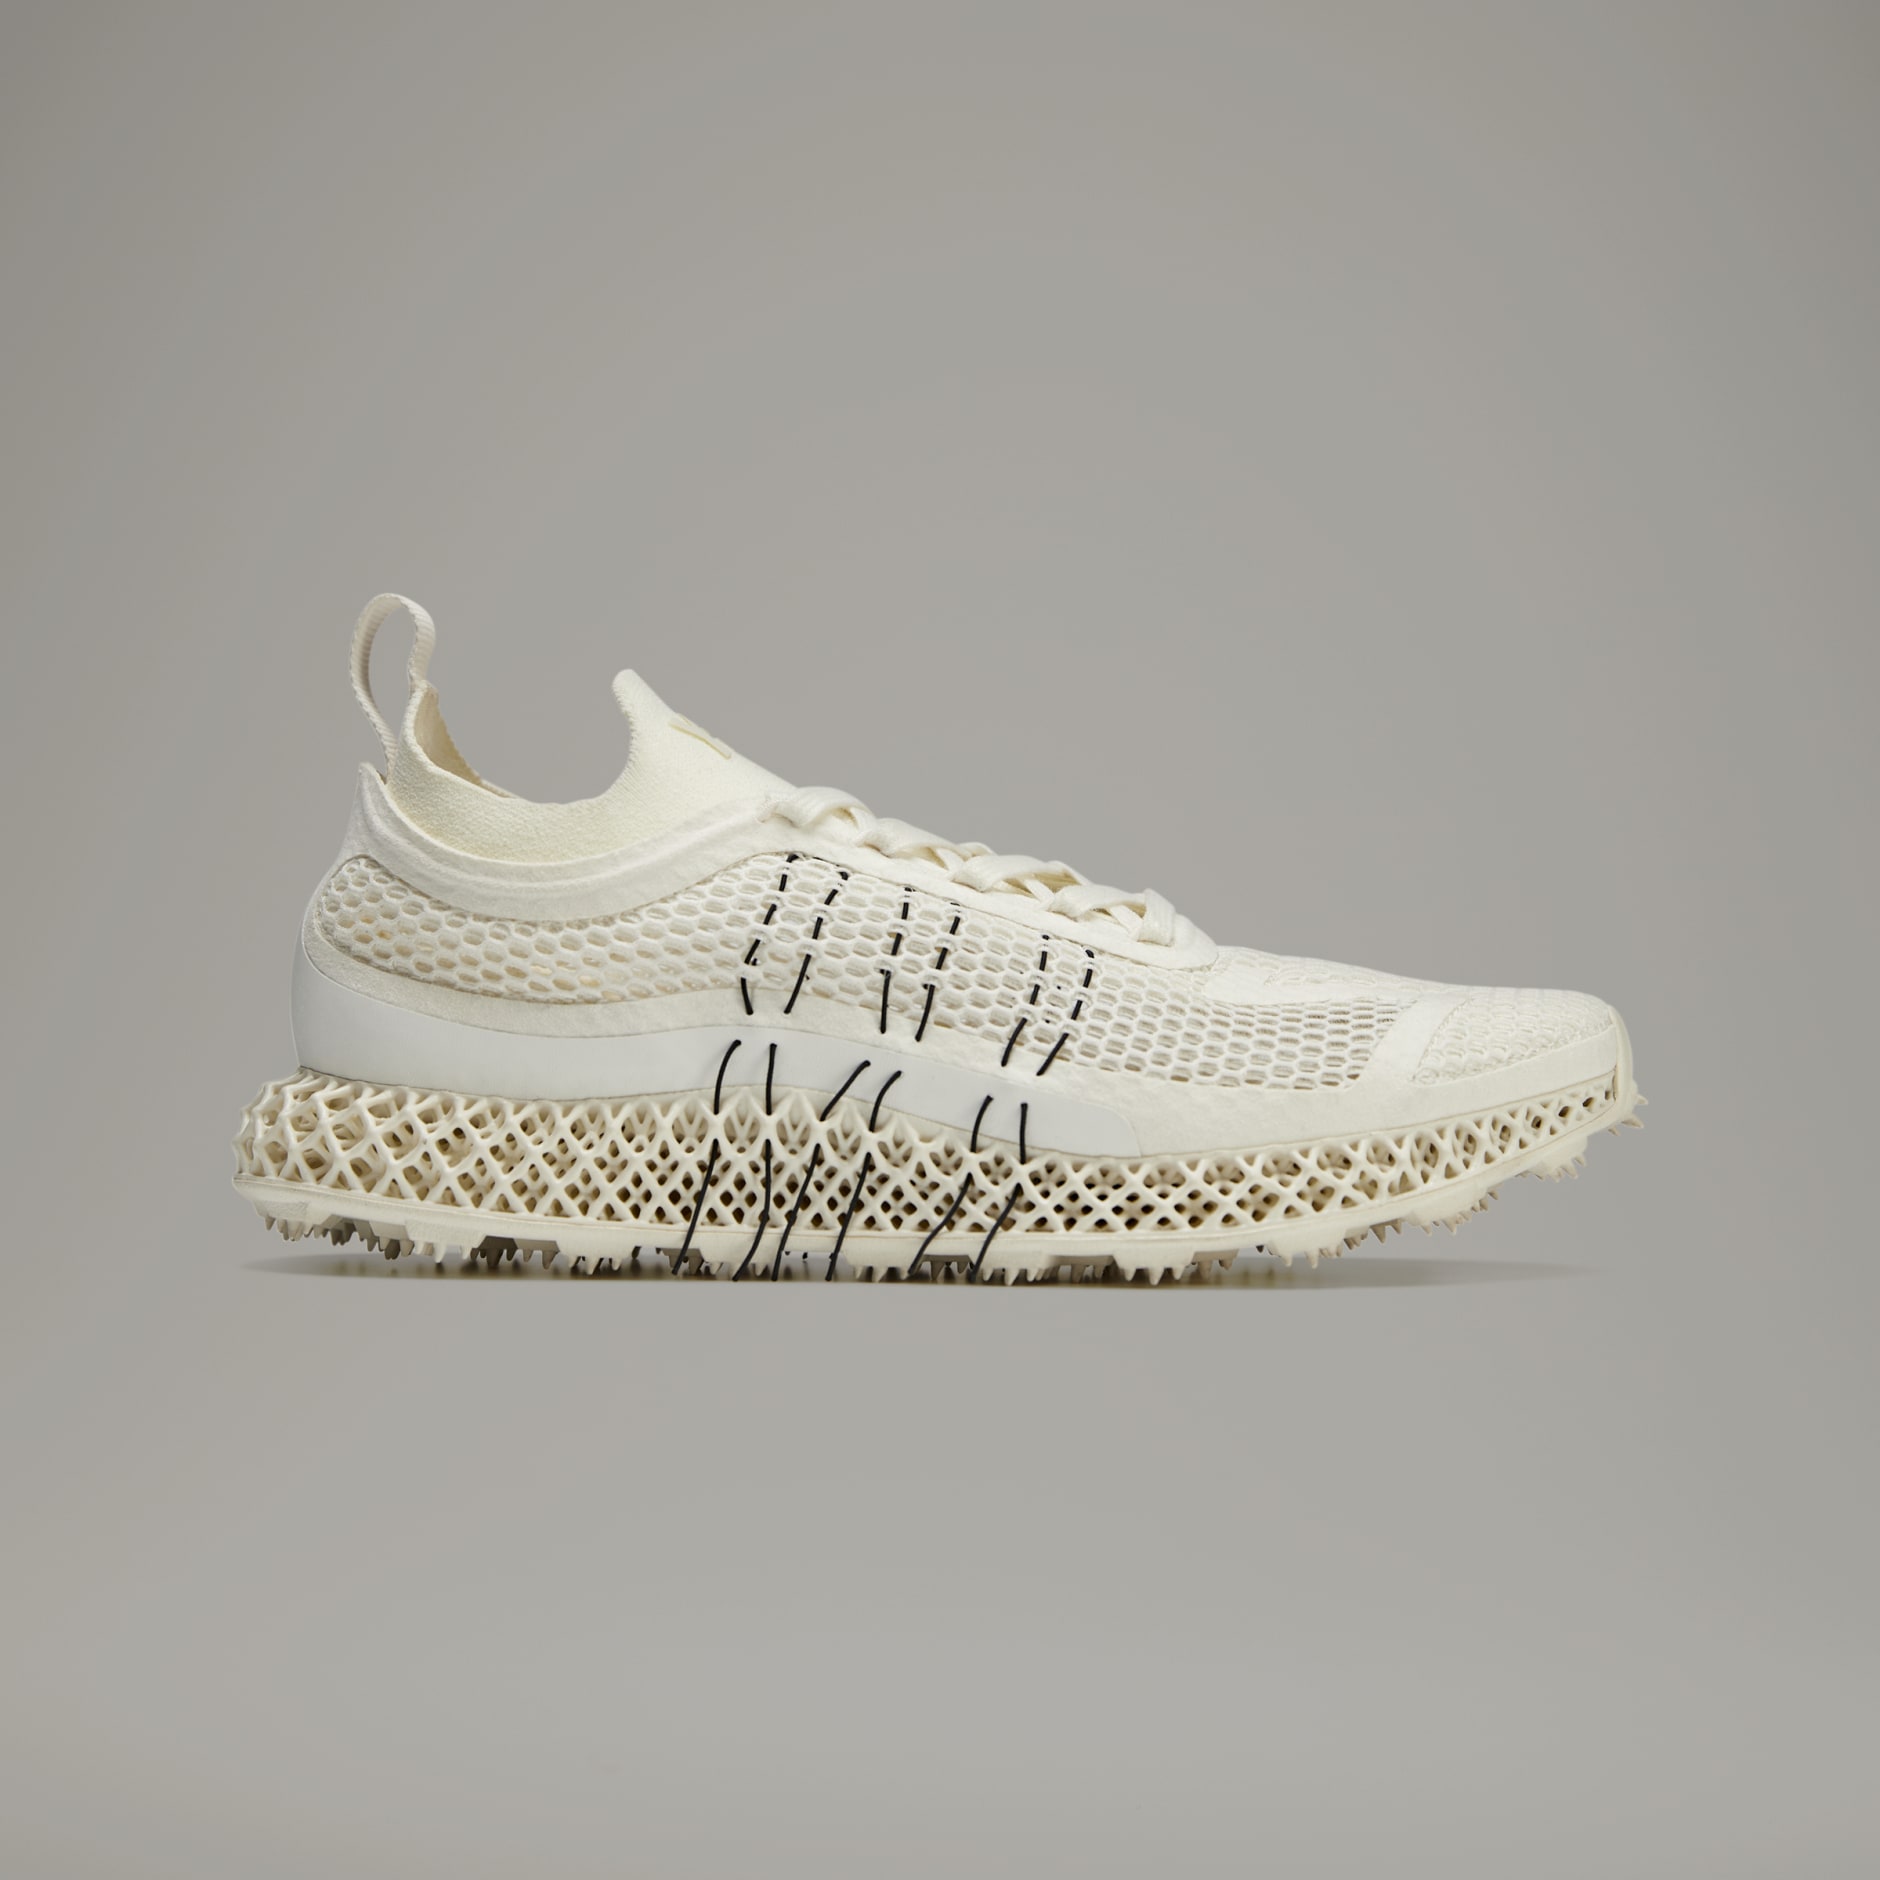 adidas Y-3 Runner 4D Halo Shoes - | adidas